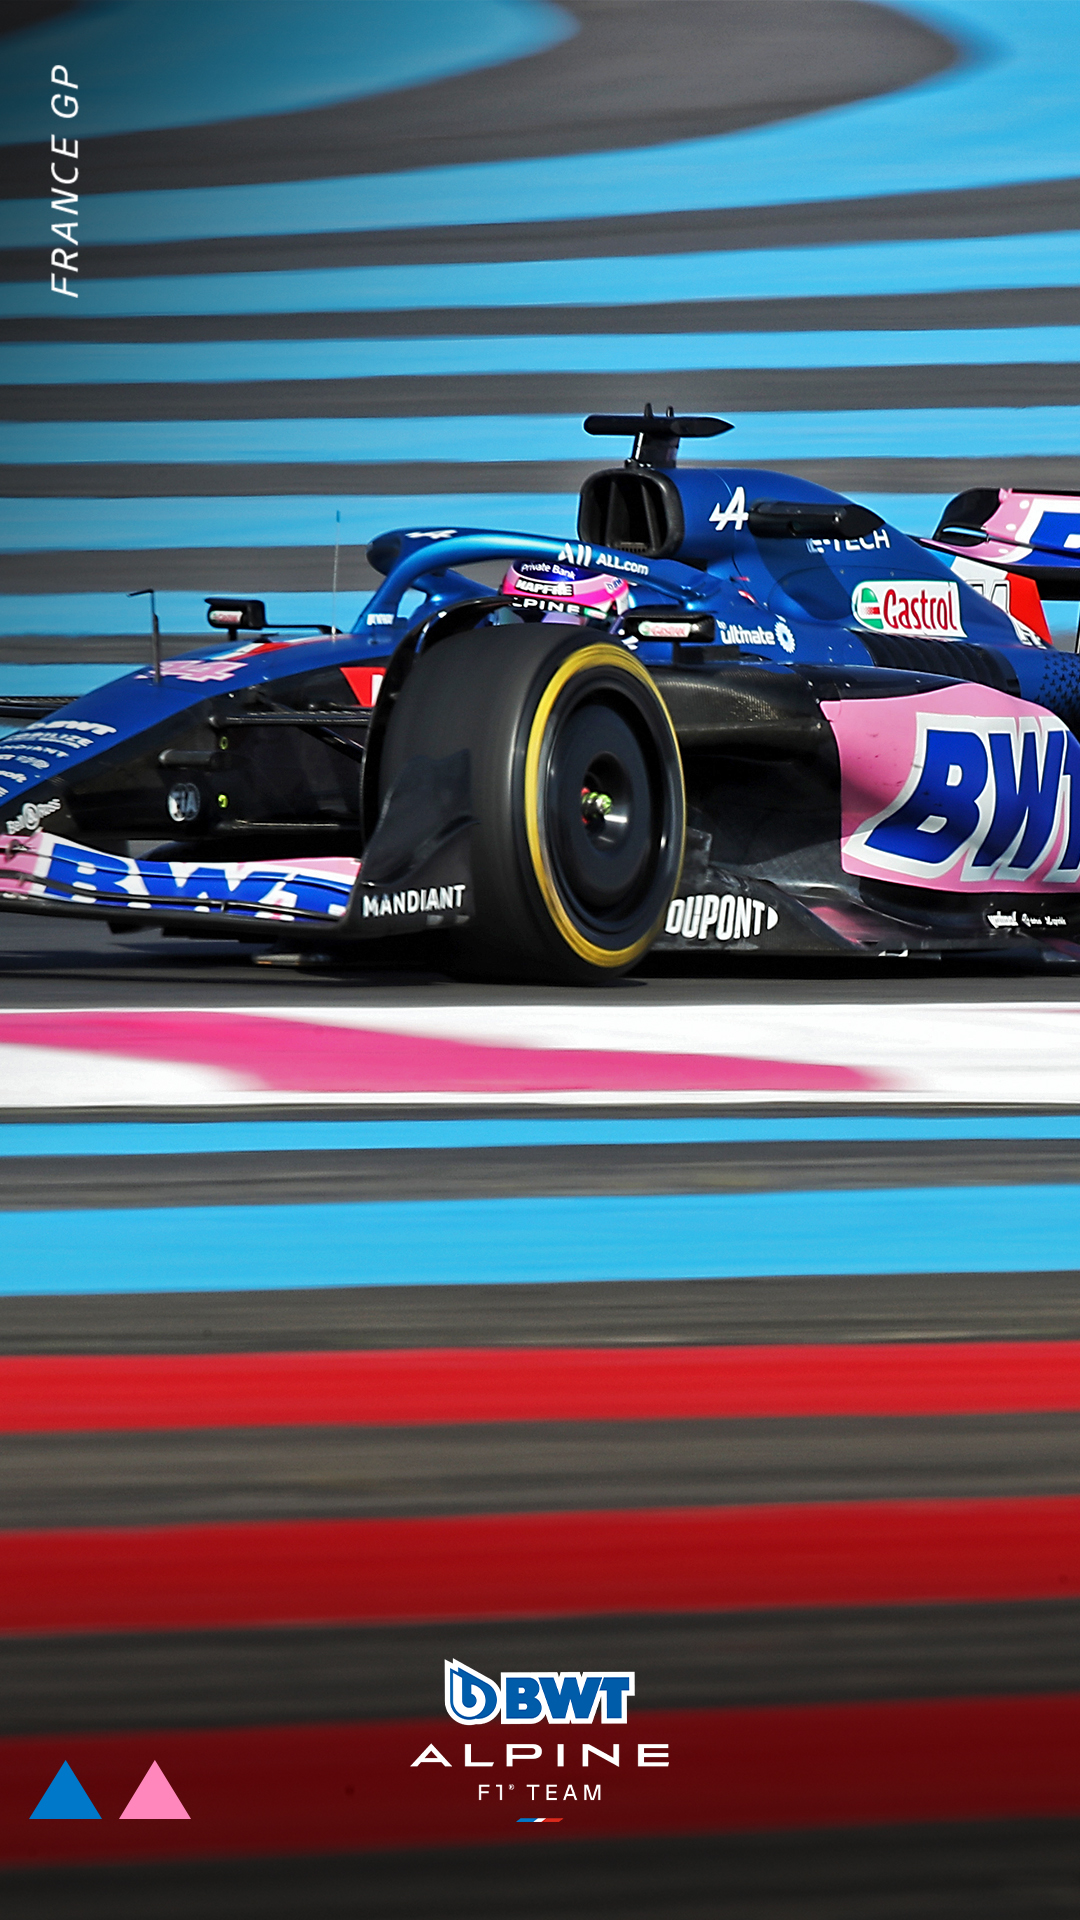 BWT Alpine F1 Team matching displays across your devices with these wallpaper for your phone